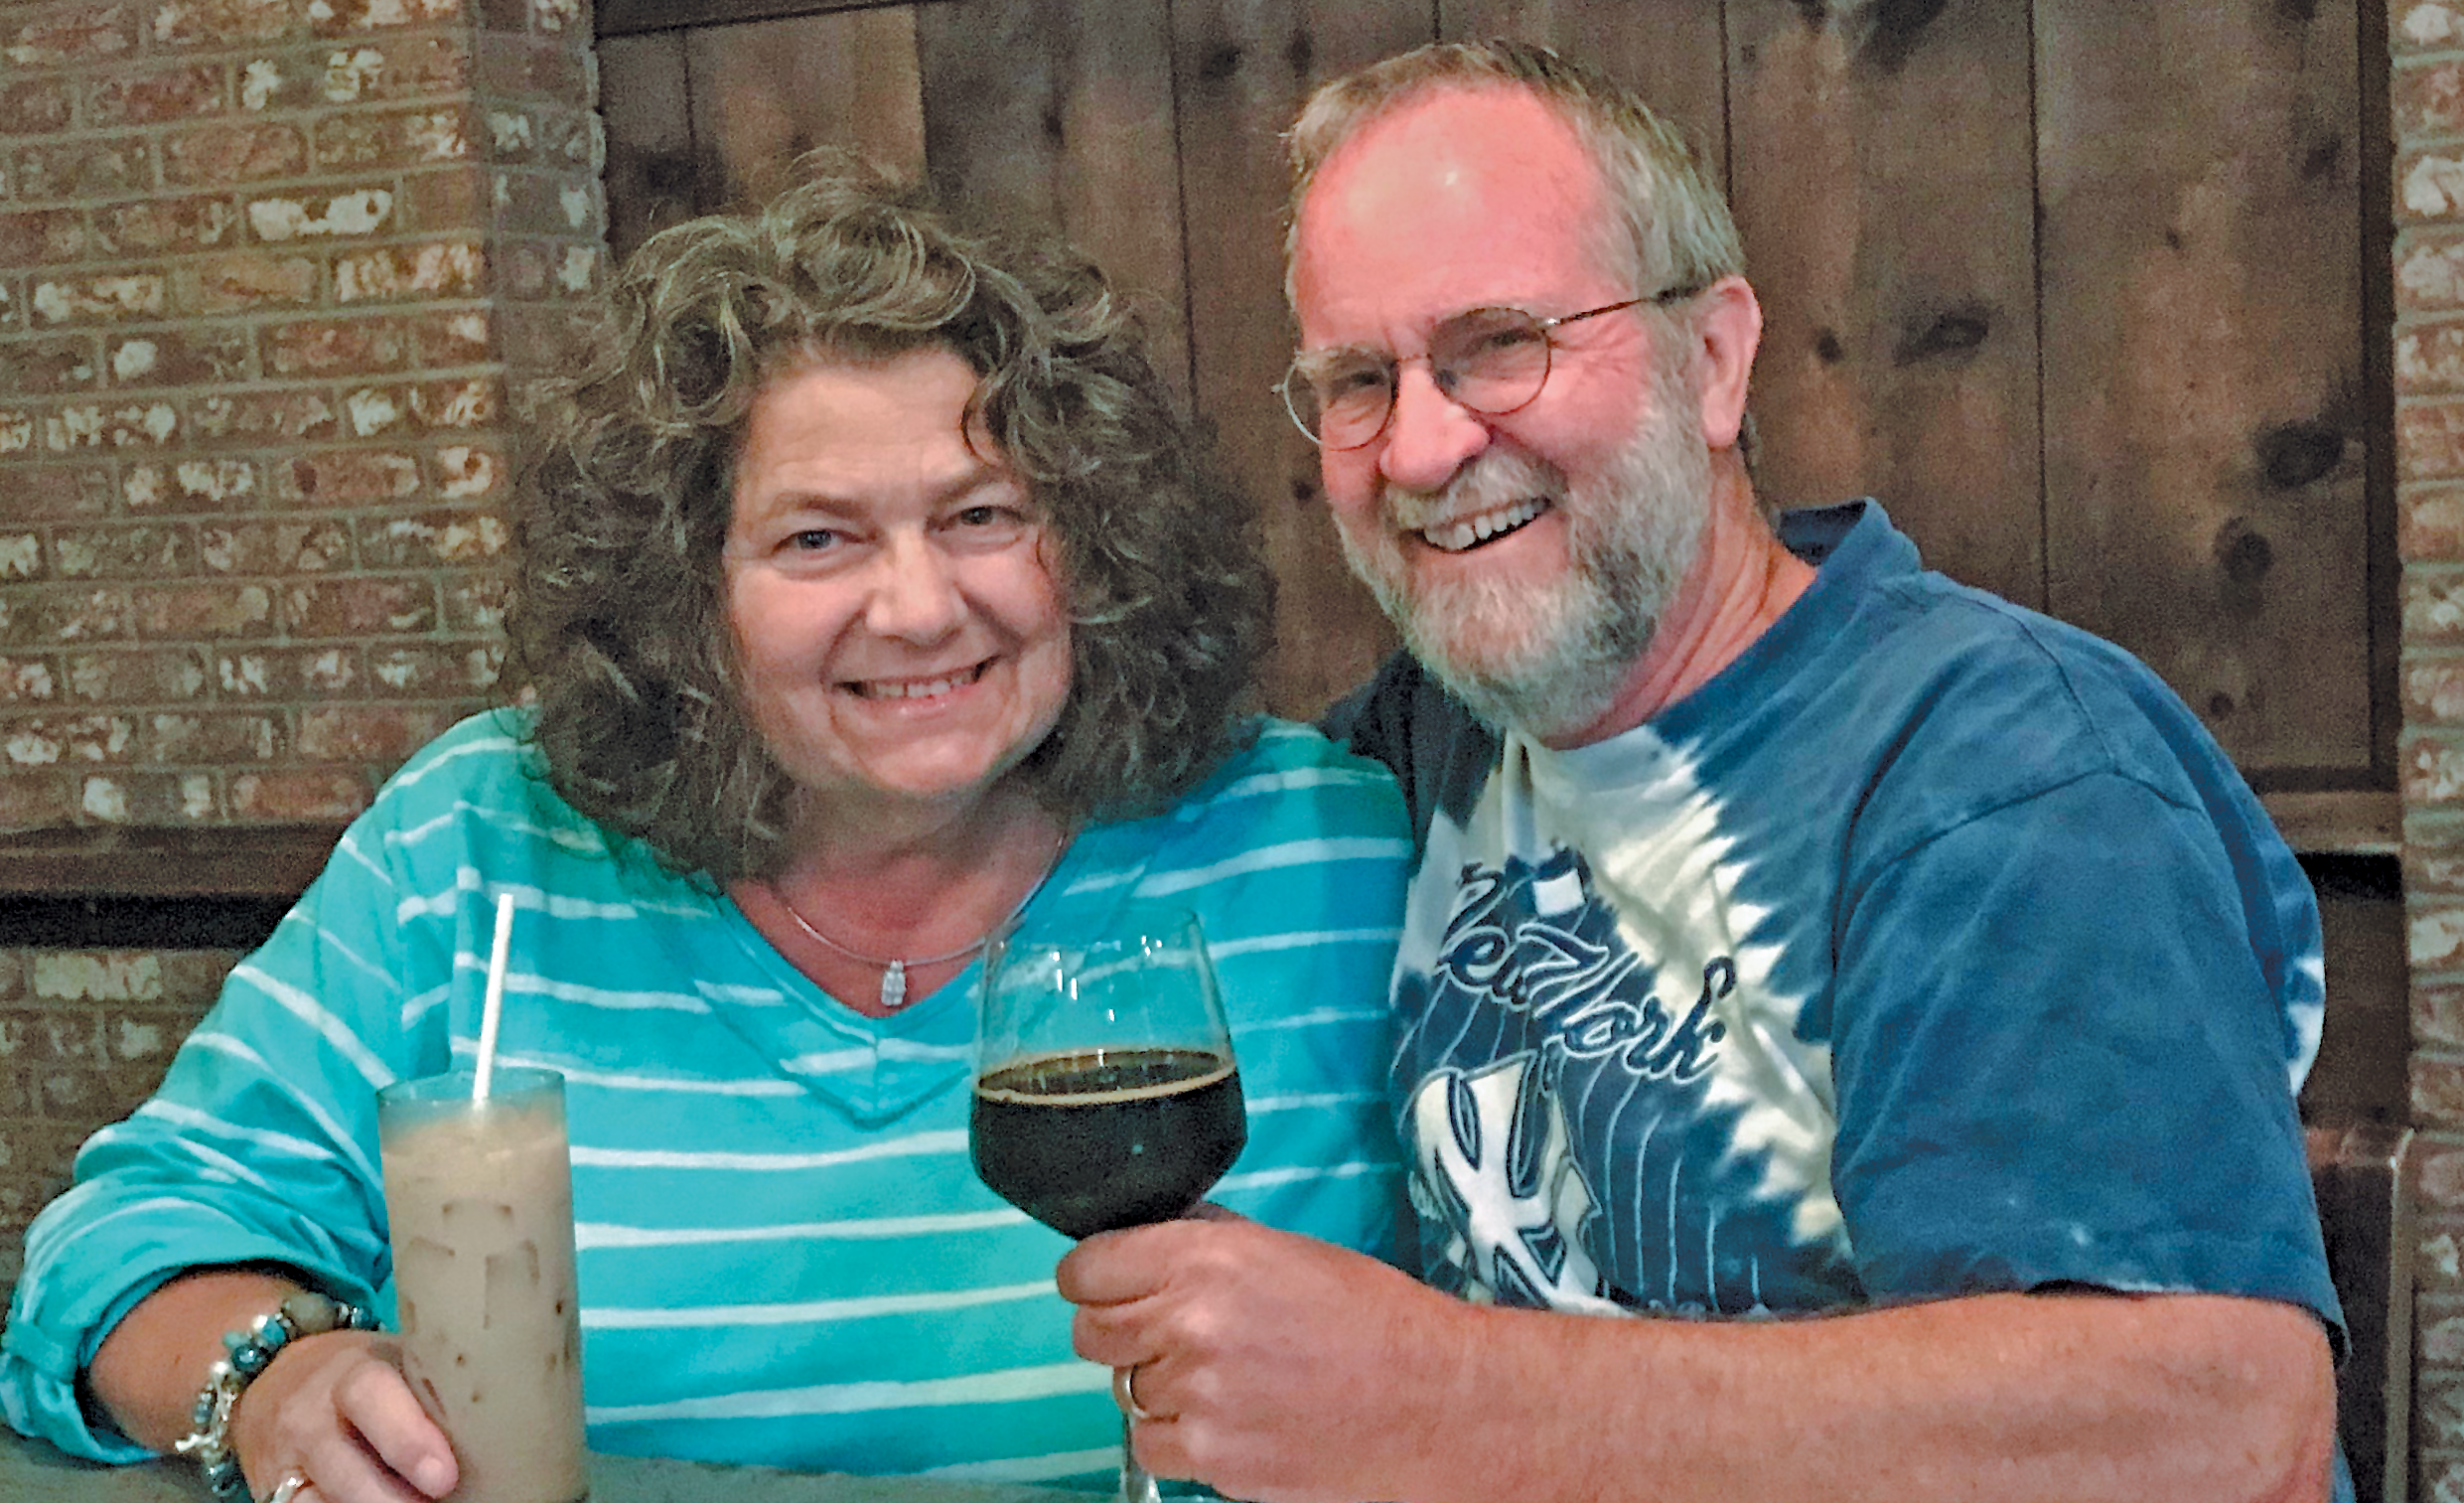 Luann (Zanke ’78) and Jimmy Gilliland ’79 fell in love on their first date.